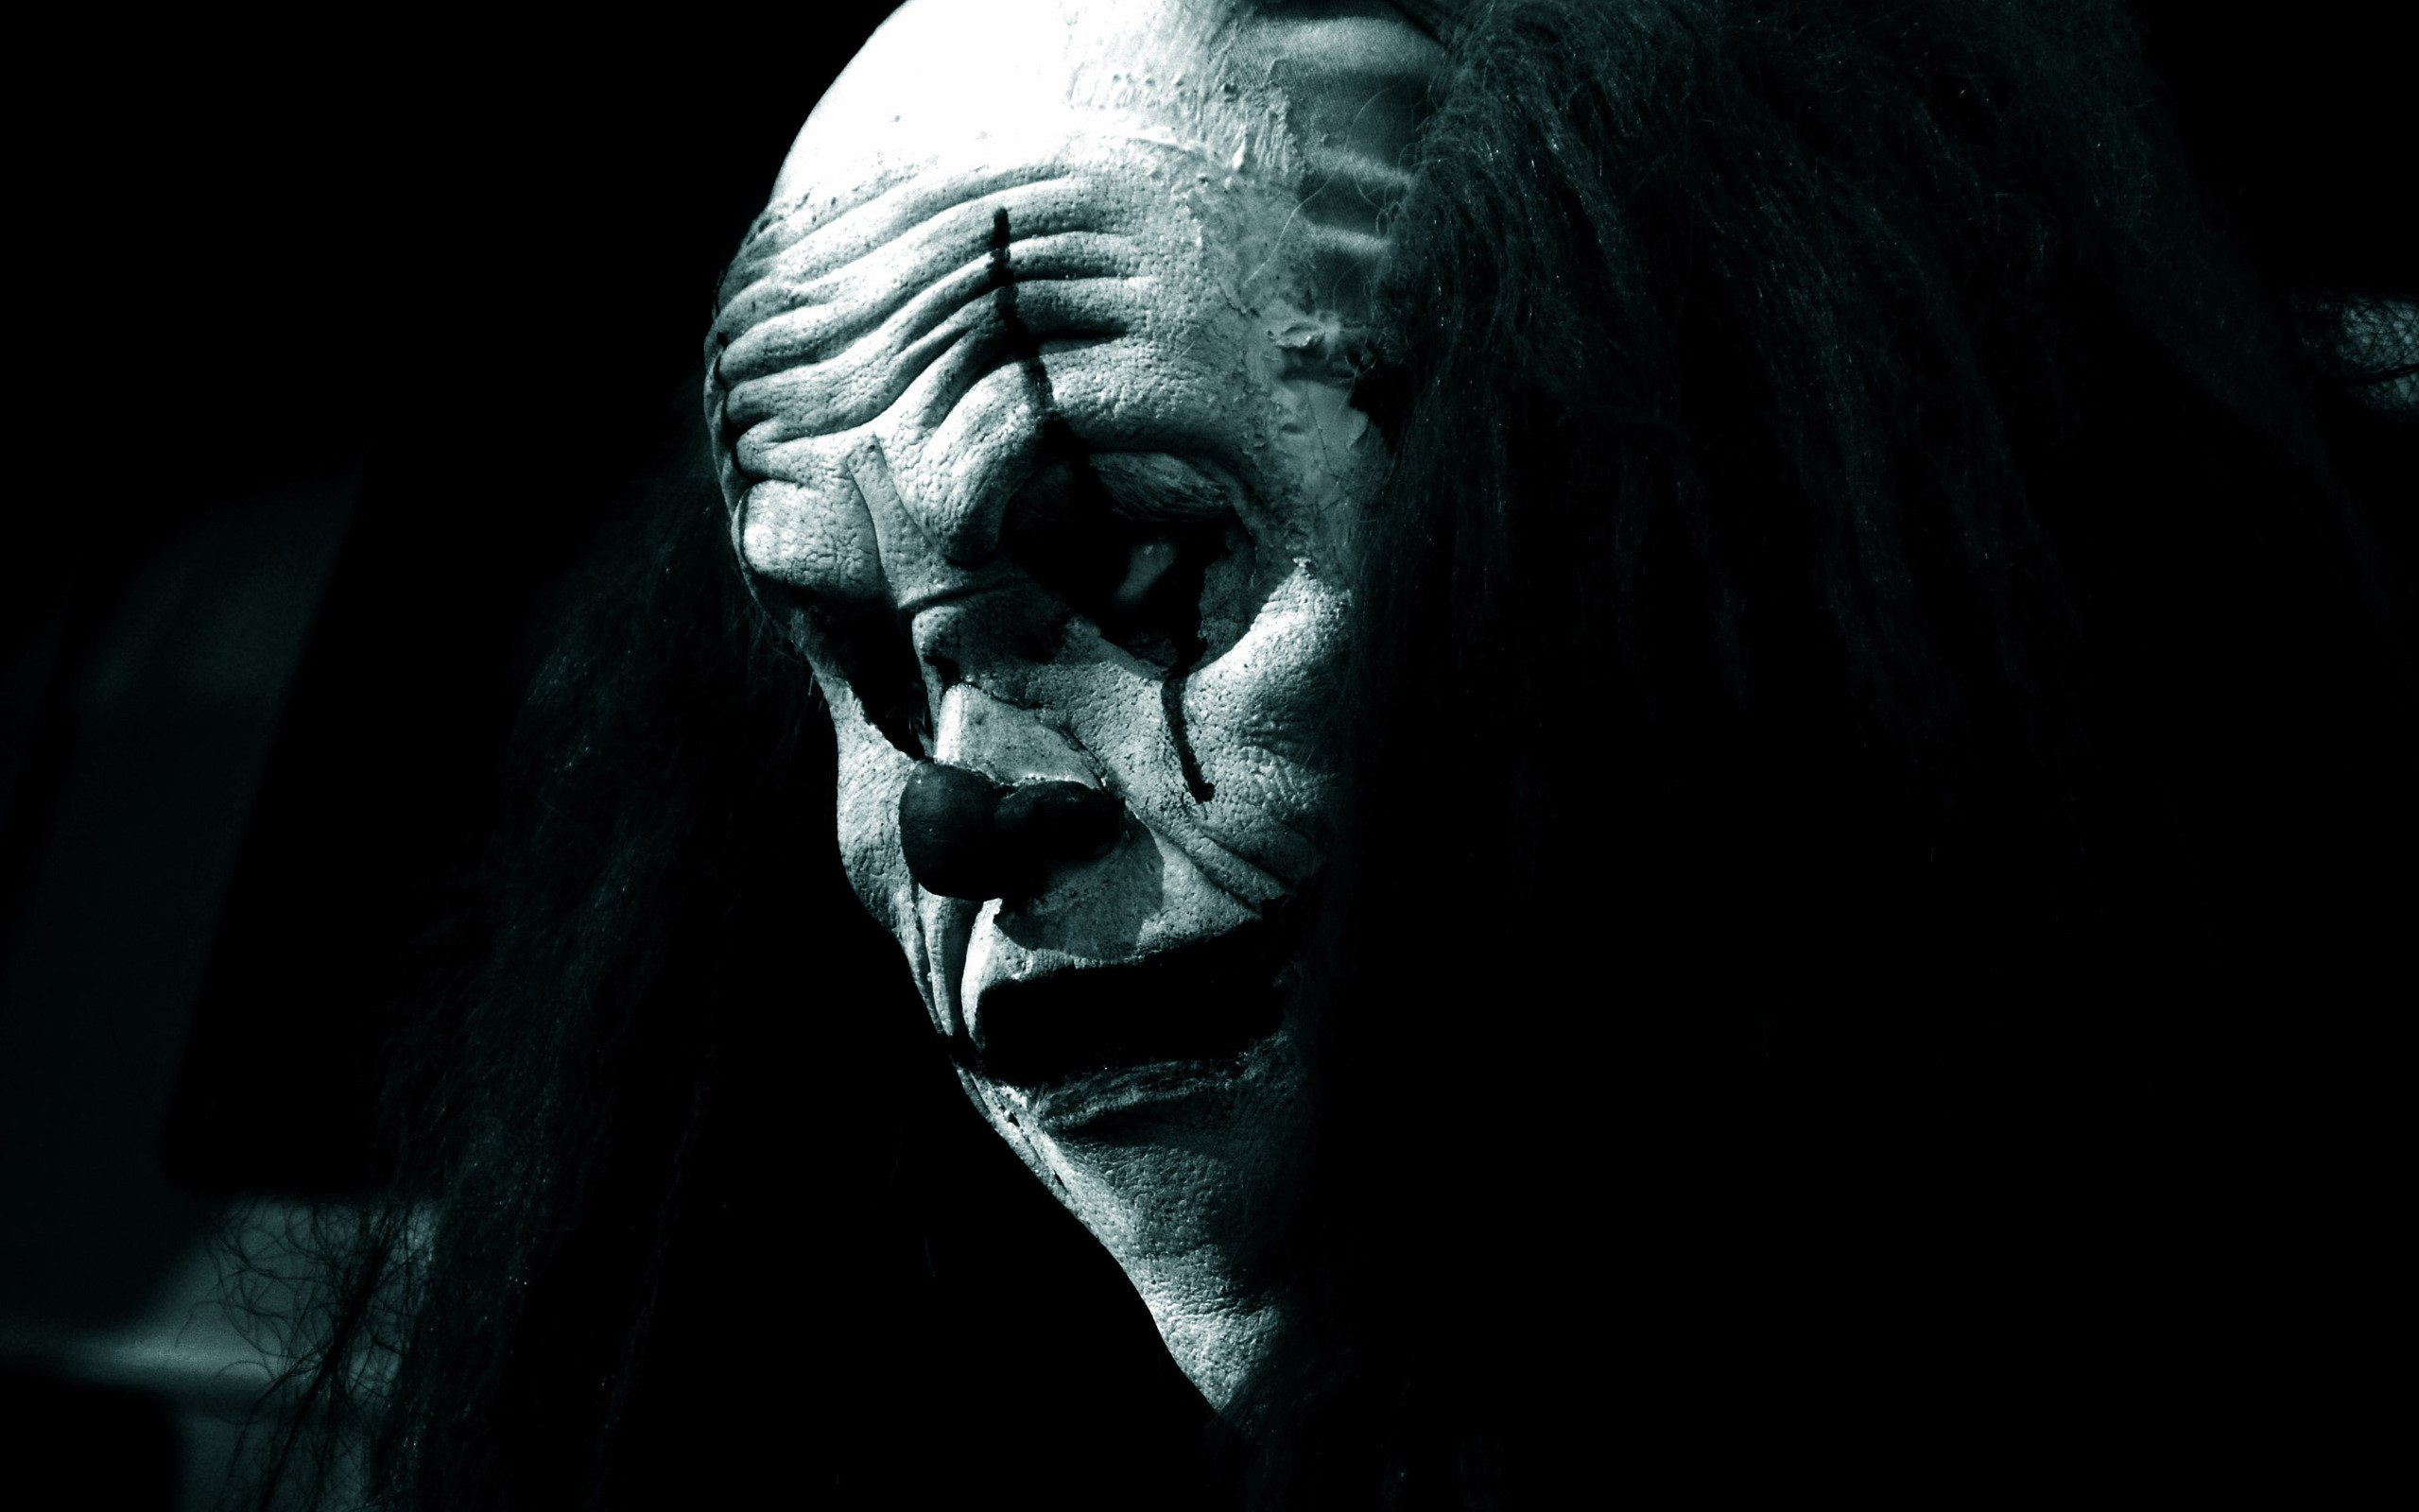 Scary clown wallpaper gothic. Wallpapers 3d for desktop, 3d pictures